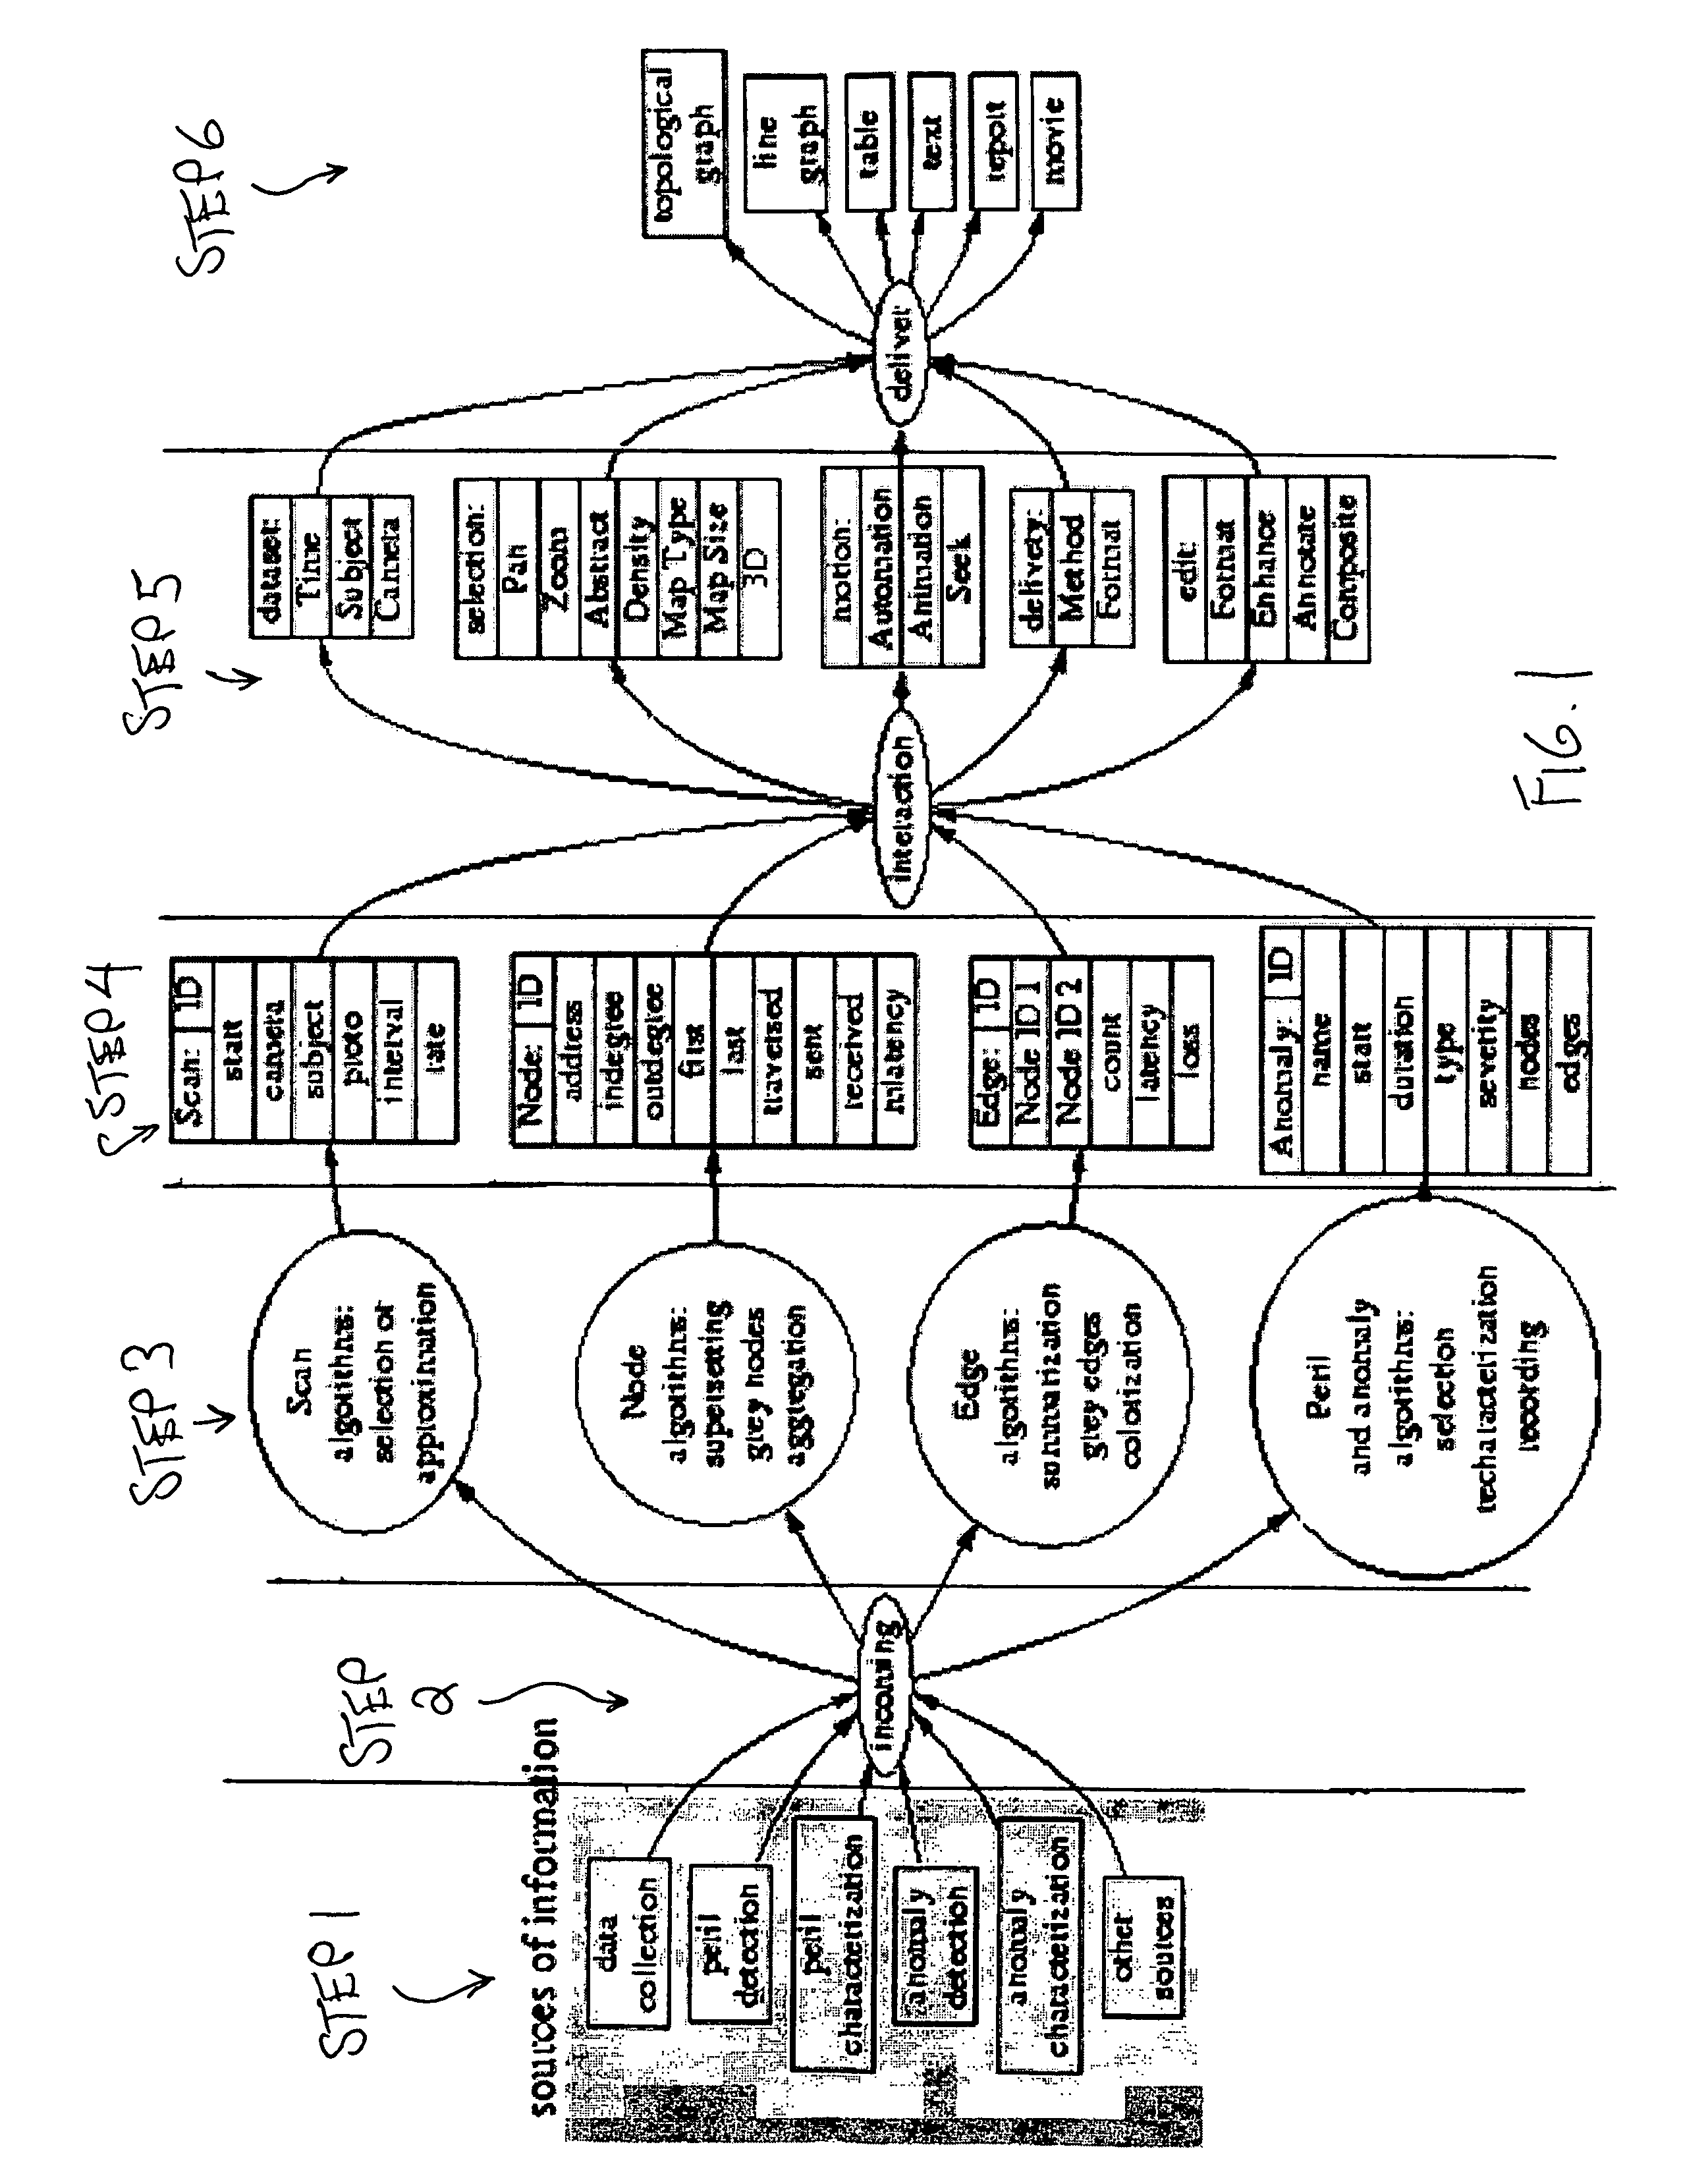 Method and apparatus for aggregating, condensing, supersetting, and displaying network topology and performance data